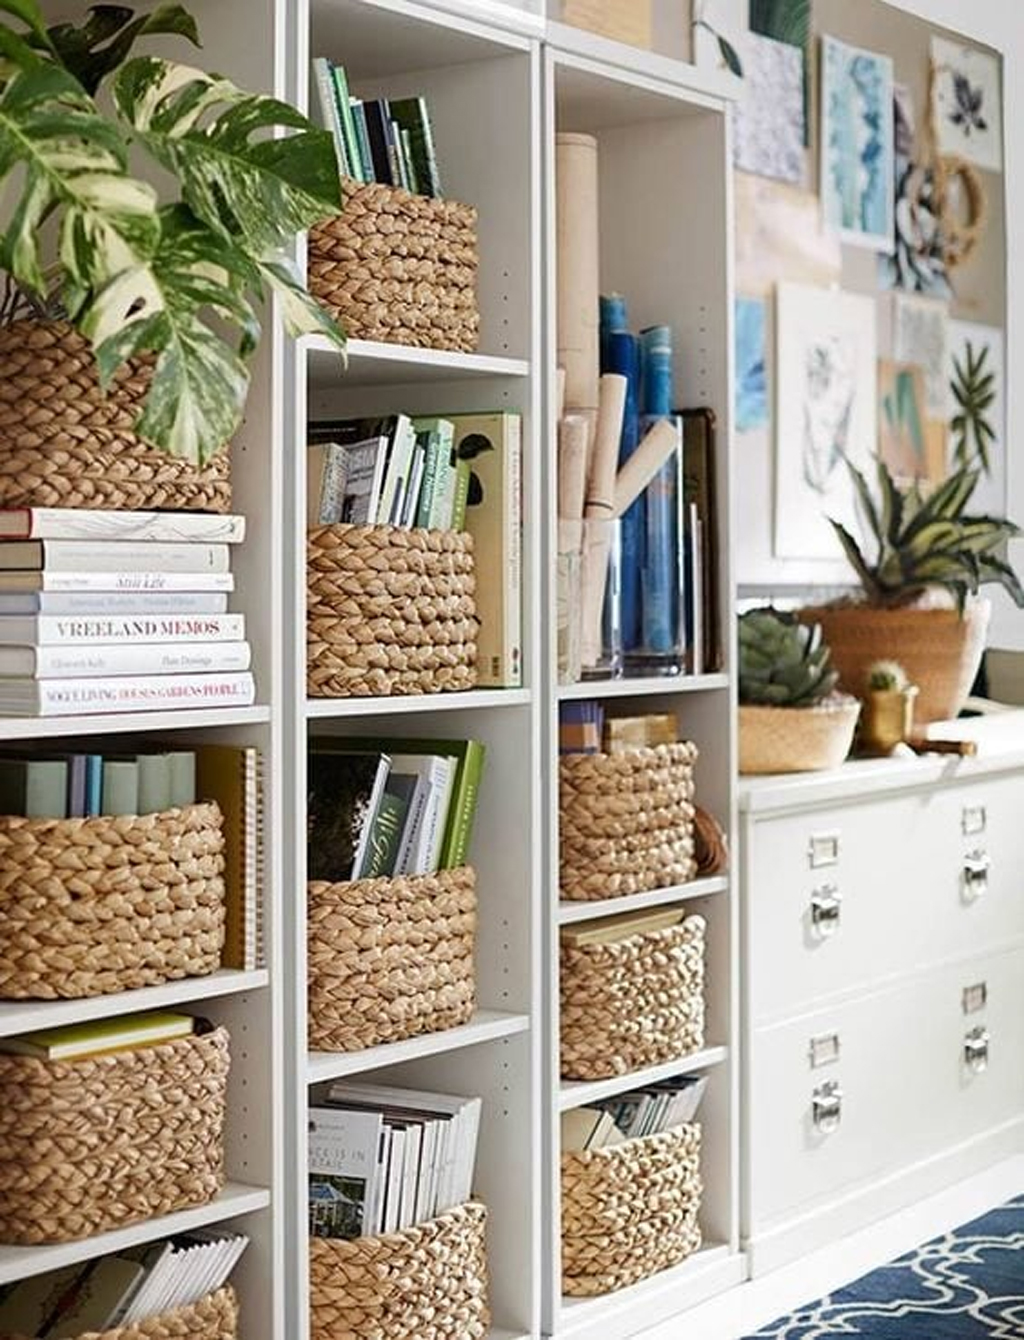 Tips and Decor Ideas For a Home Office Space - choose practical storage solutions.